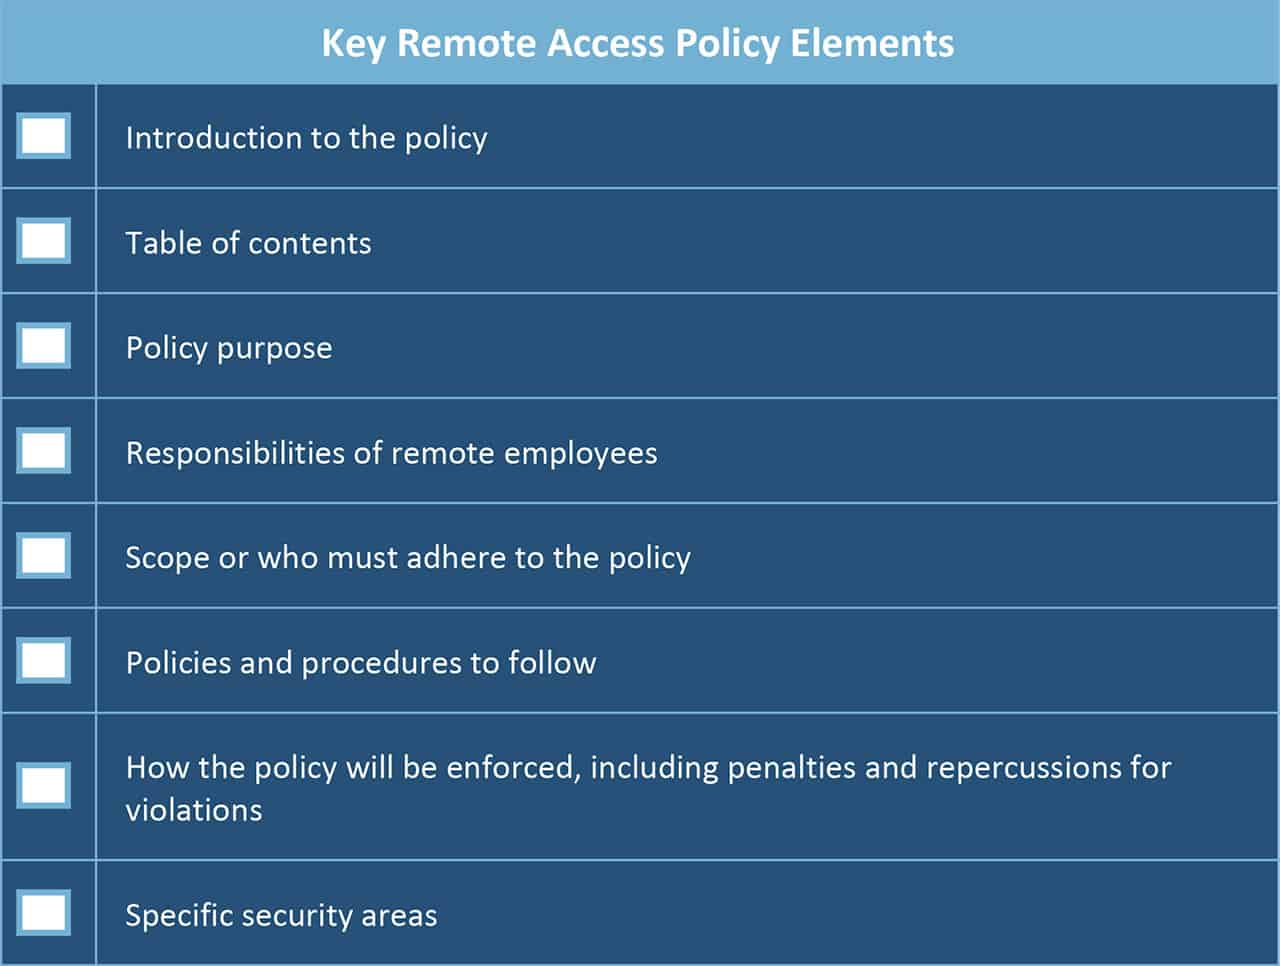 Key Remote Access Policy Elements